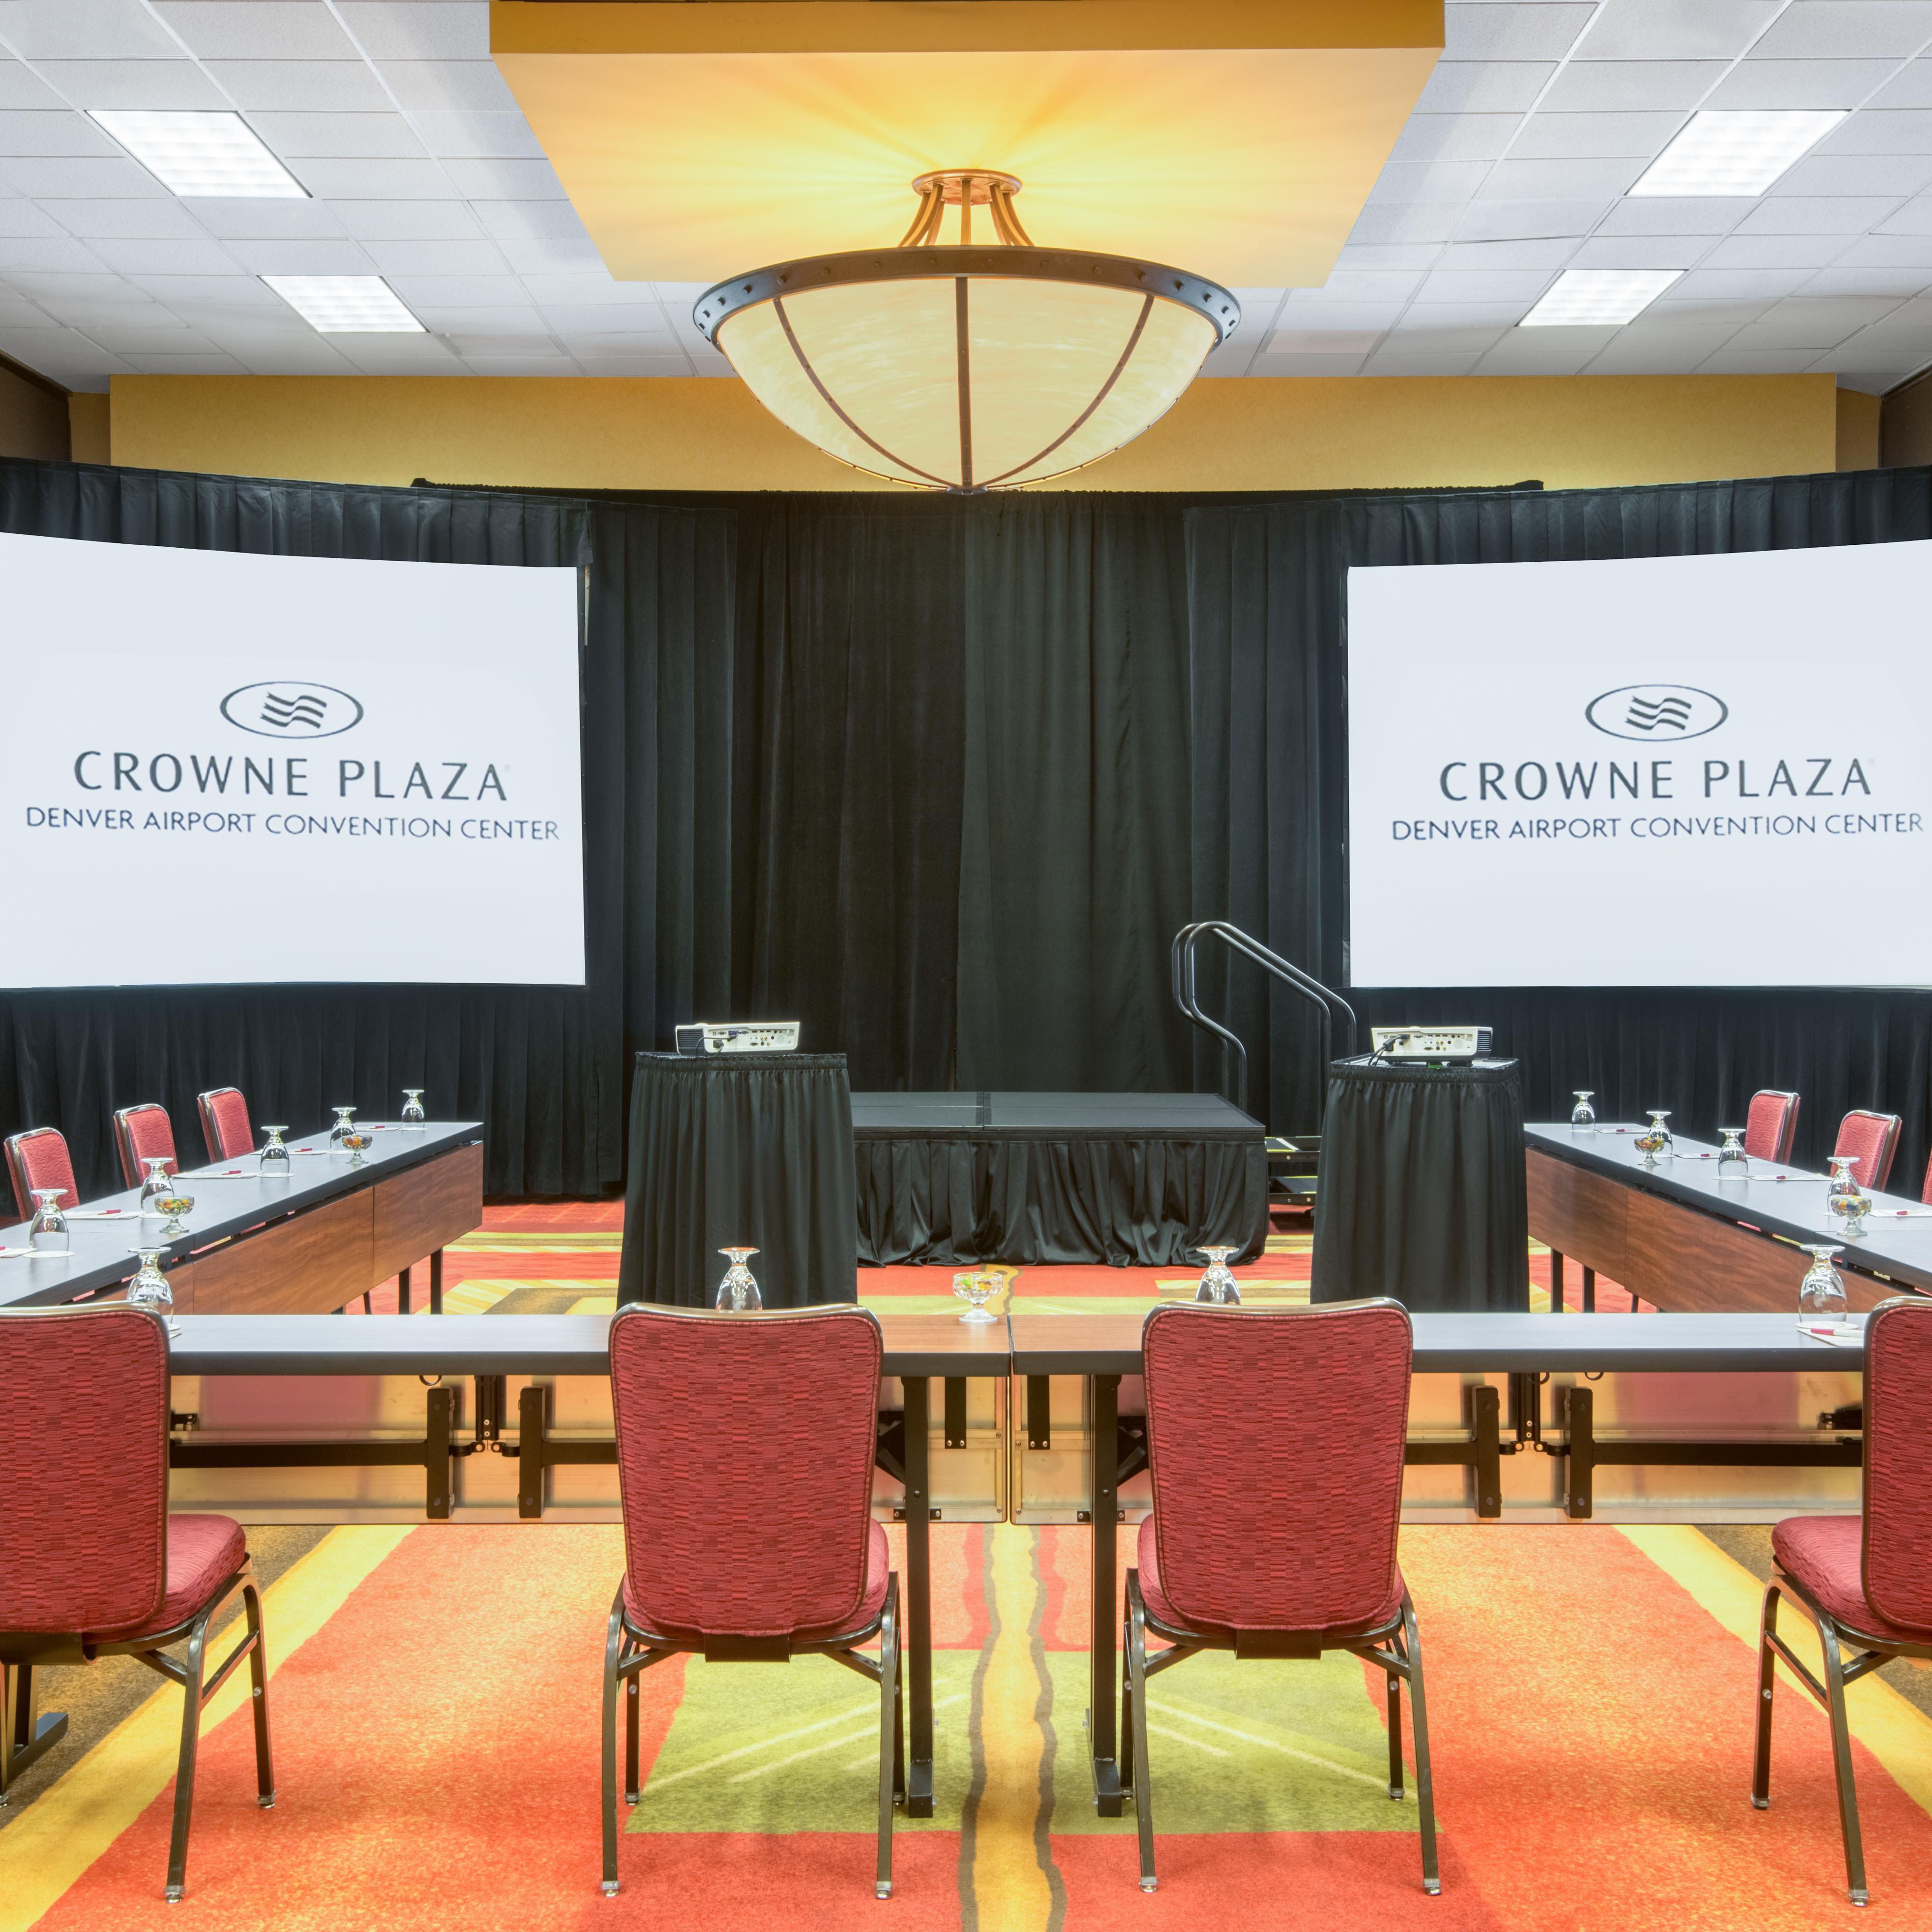 Fully-equipped Meeting Rooms and eveything you need for your event